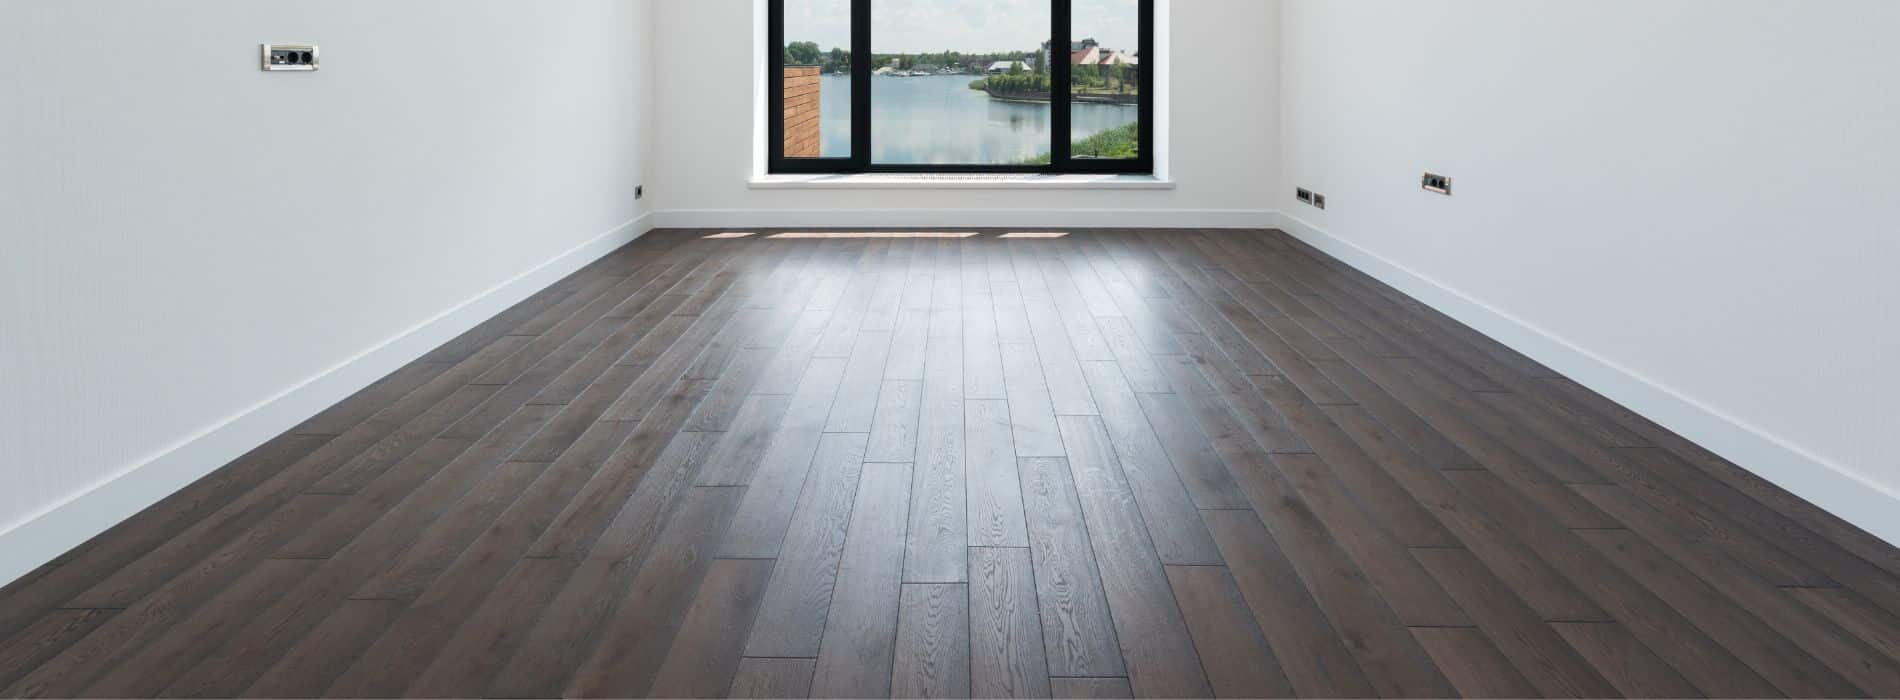 Exquisite 7-year-old hardwood floor in Archway, N19 skillfully restored by Mr Sander®. The use of Bona 2.5K Frost whitewashing and Traffic HD 20% sheen matte lacquer ensures a resilient and captivating finish. Experience enduring elegance with this stunning restoration.